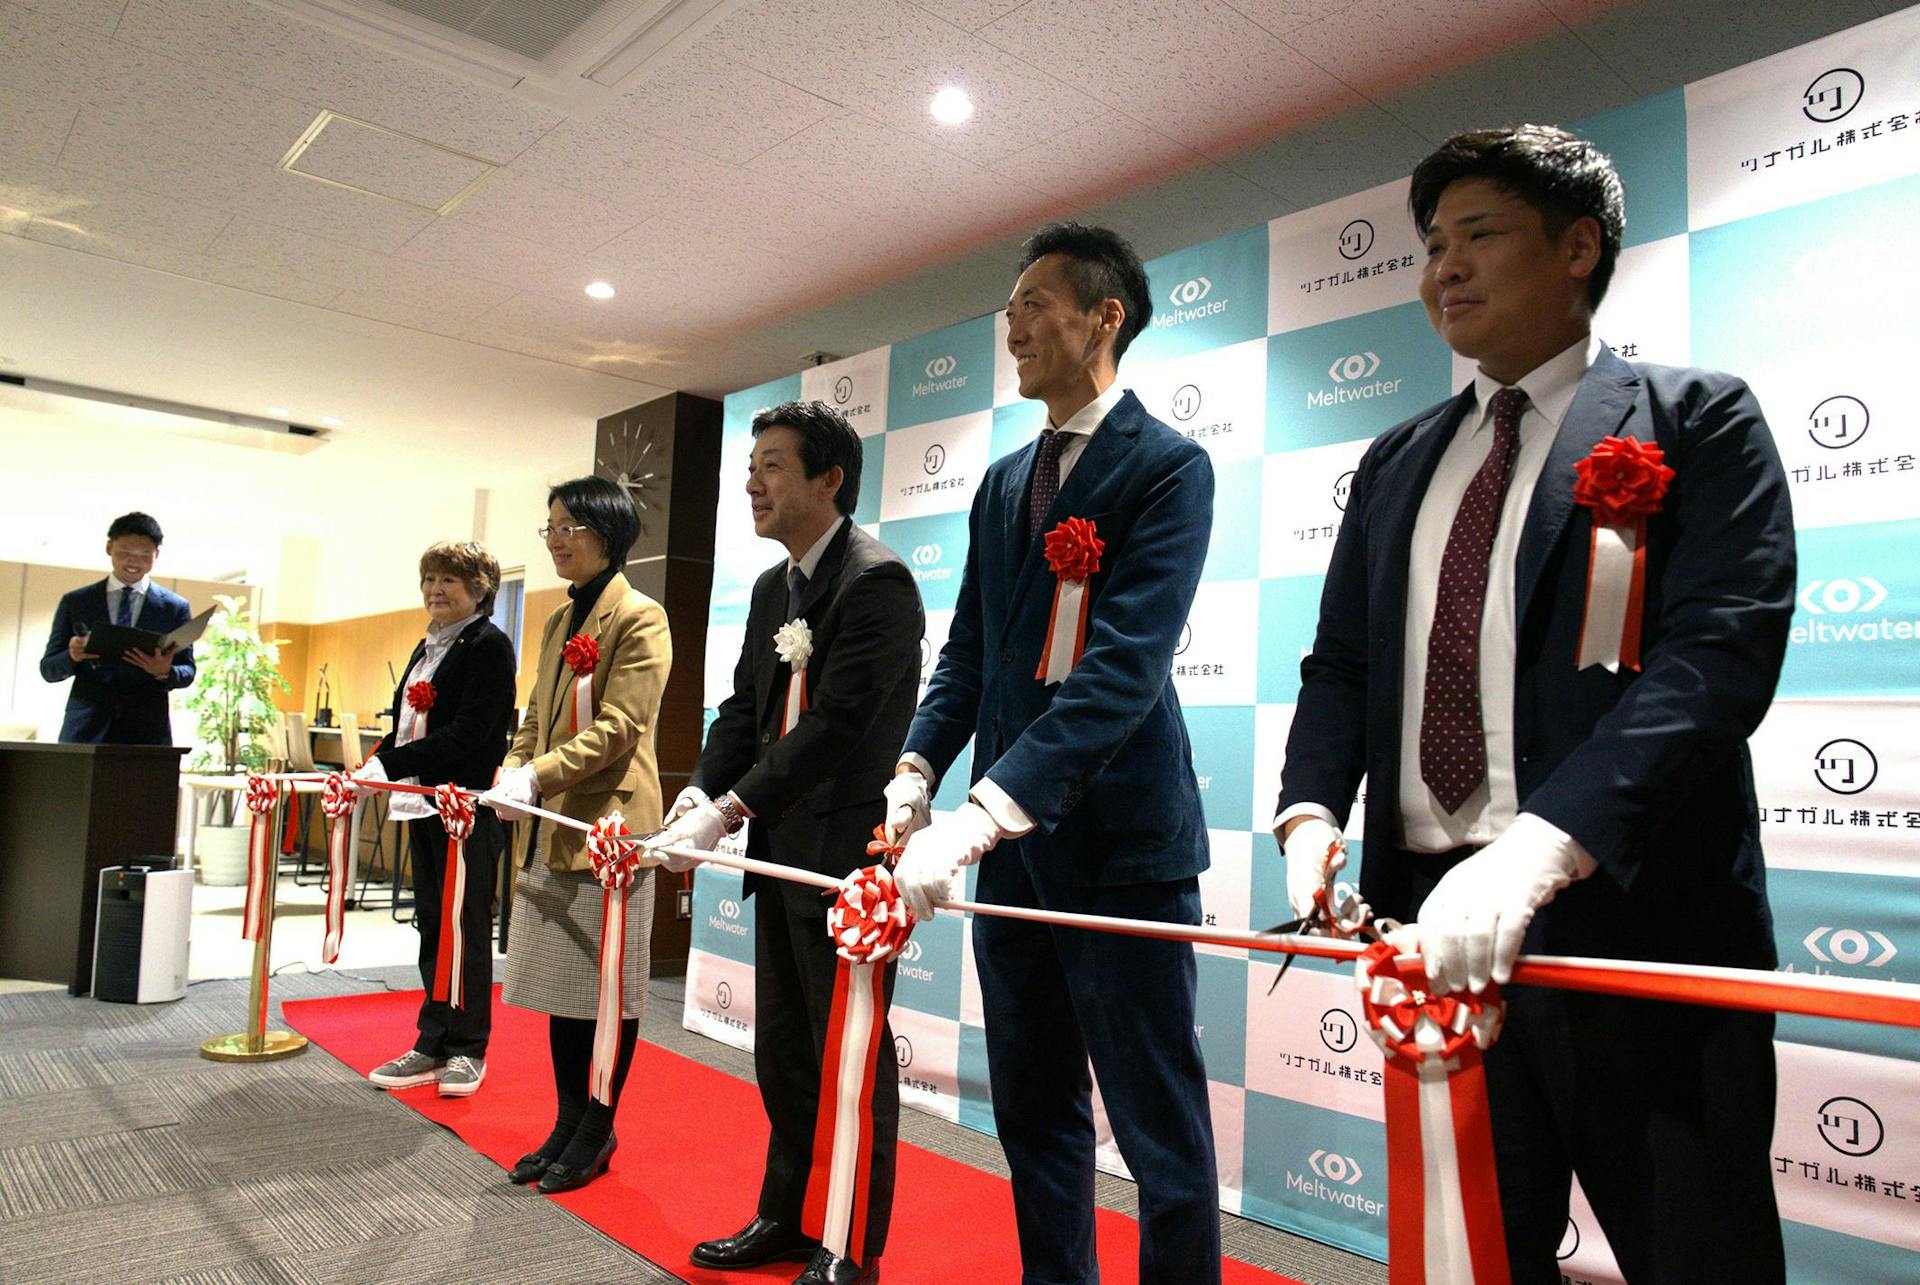 Opening ceremony of Hakodate Data science lab